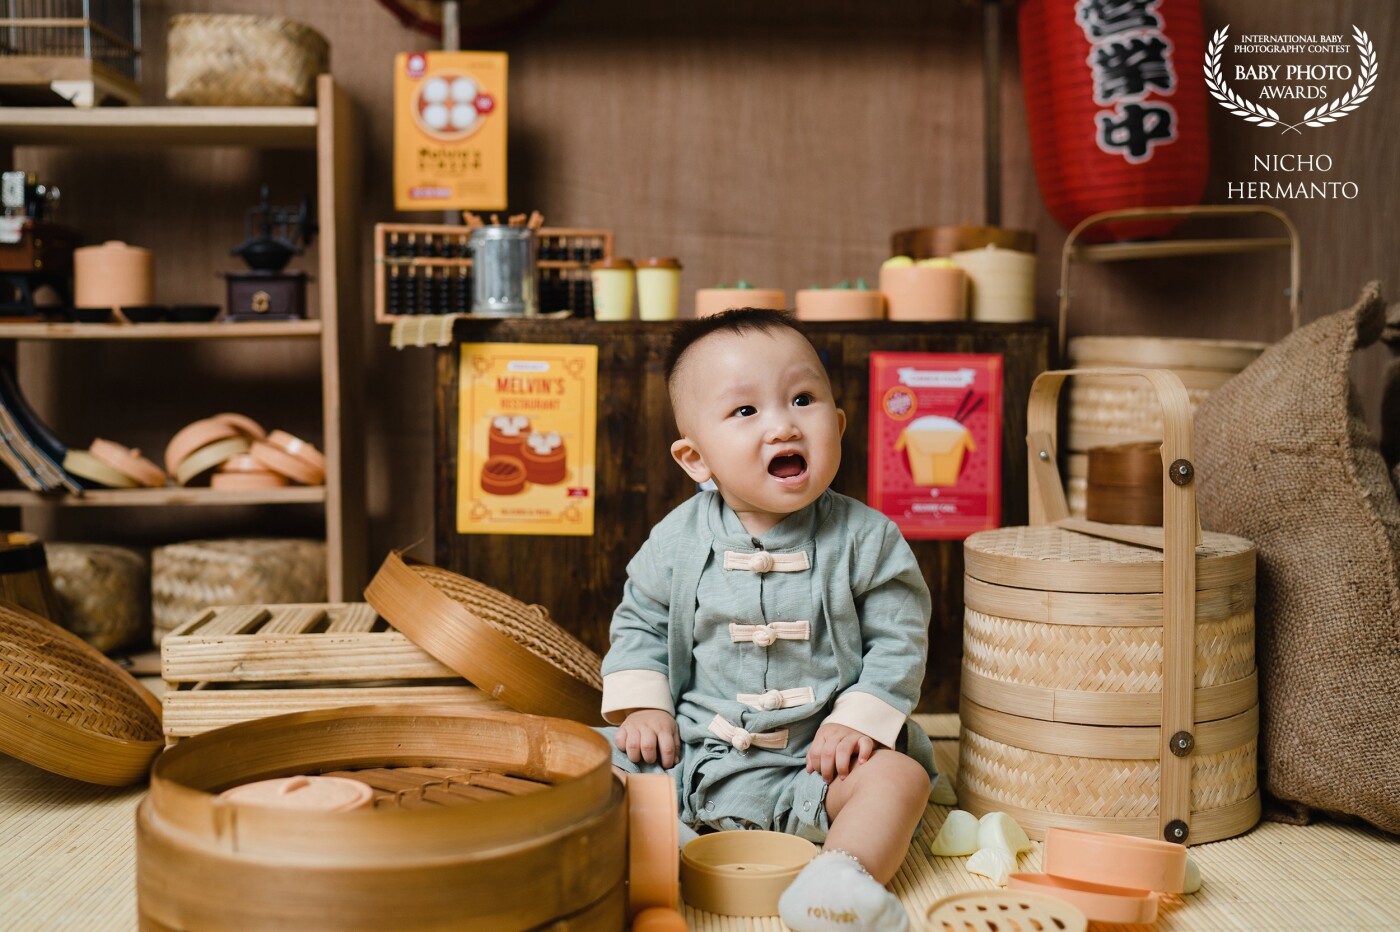 This child loves to play with the dim sum seller. playing with his older sister. Her mother also likes her expression in the photo.